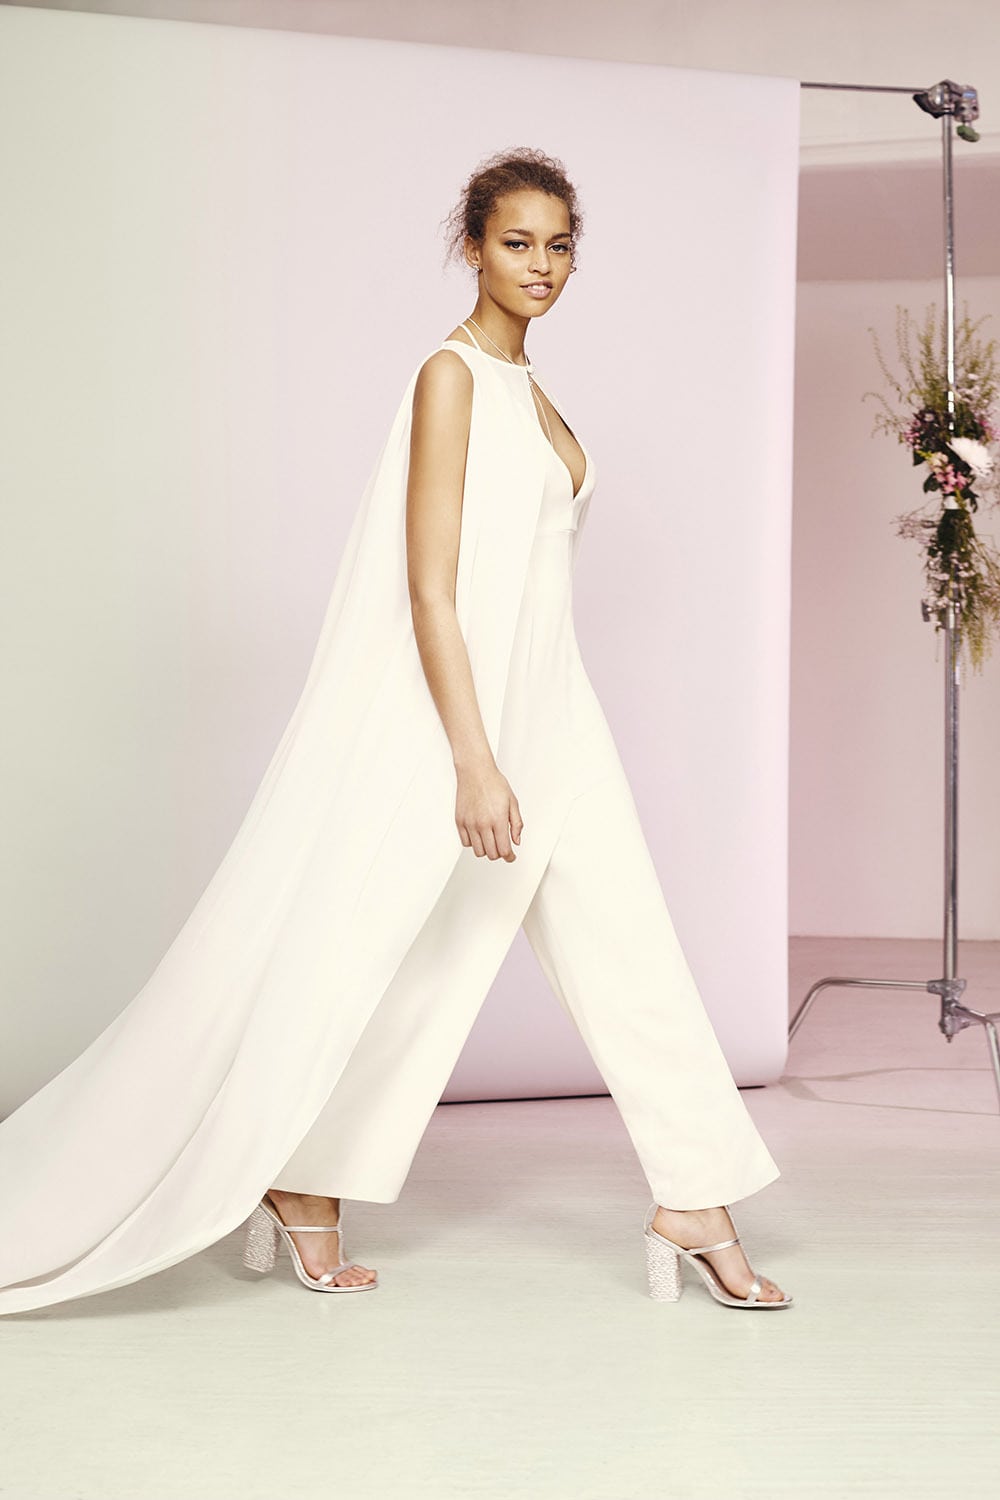 ASOS Bridal Jumpsuit with Cape Overlay ú150 Live 14.03